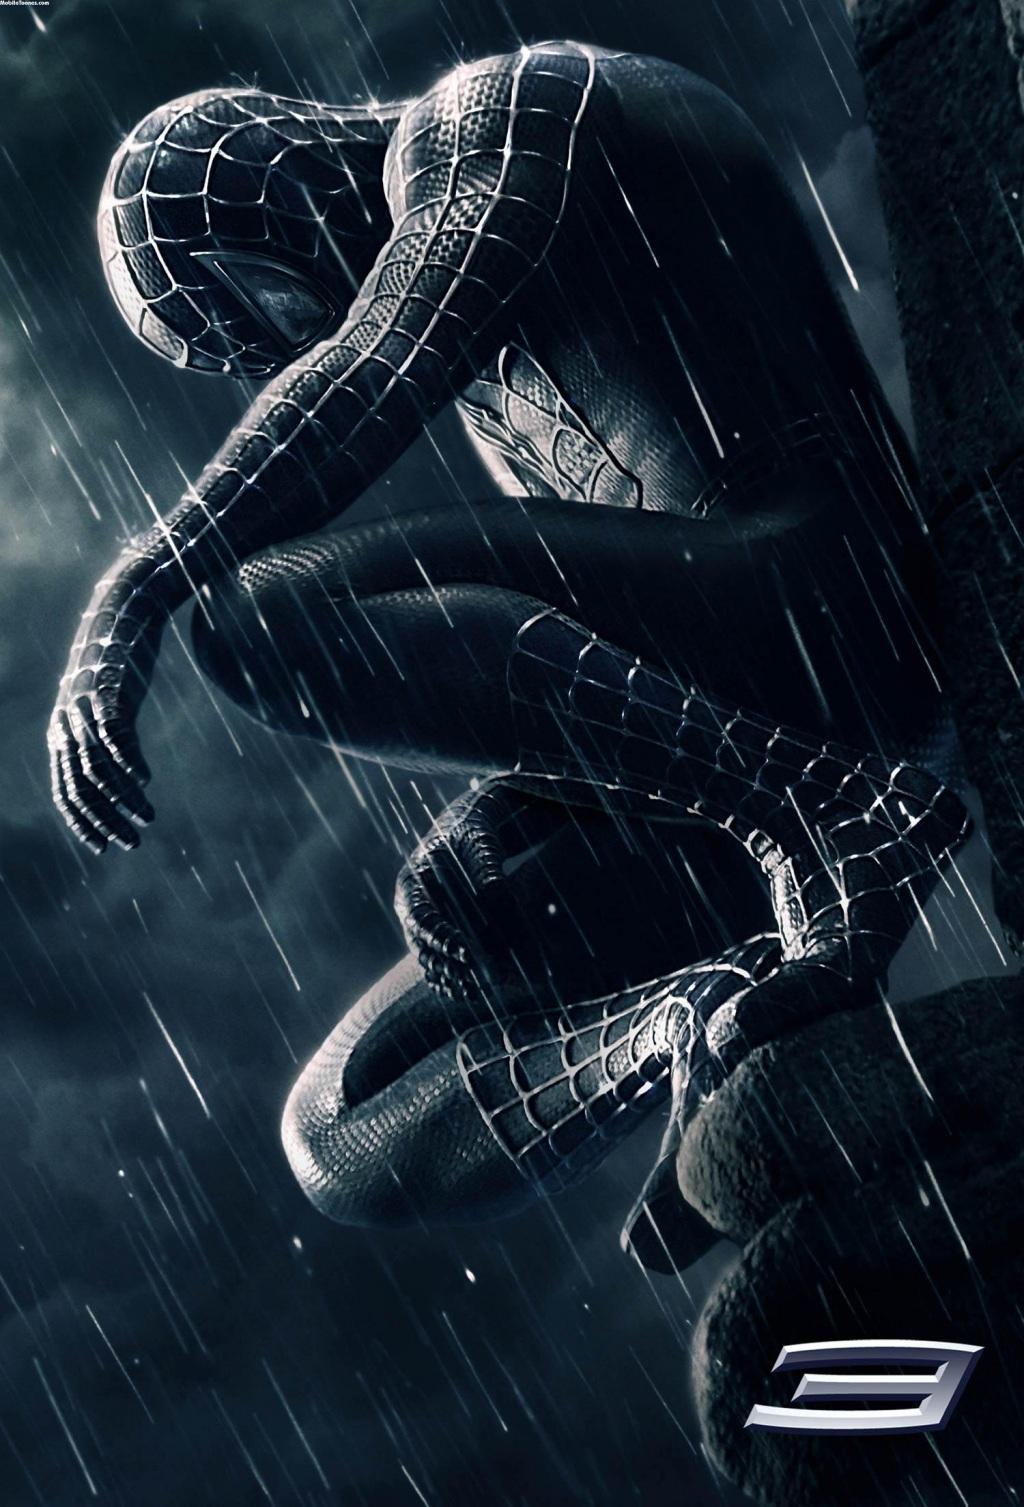 Full HD Spiderman 3 Wallpapers For Mobile